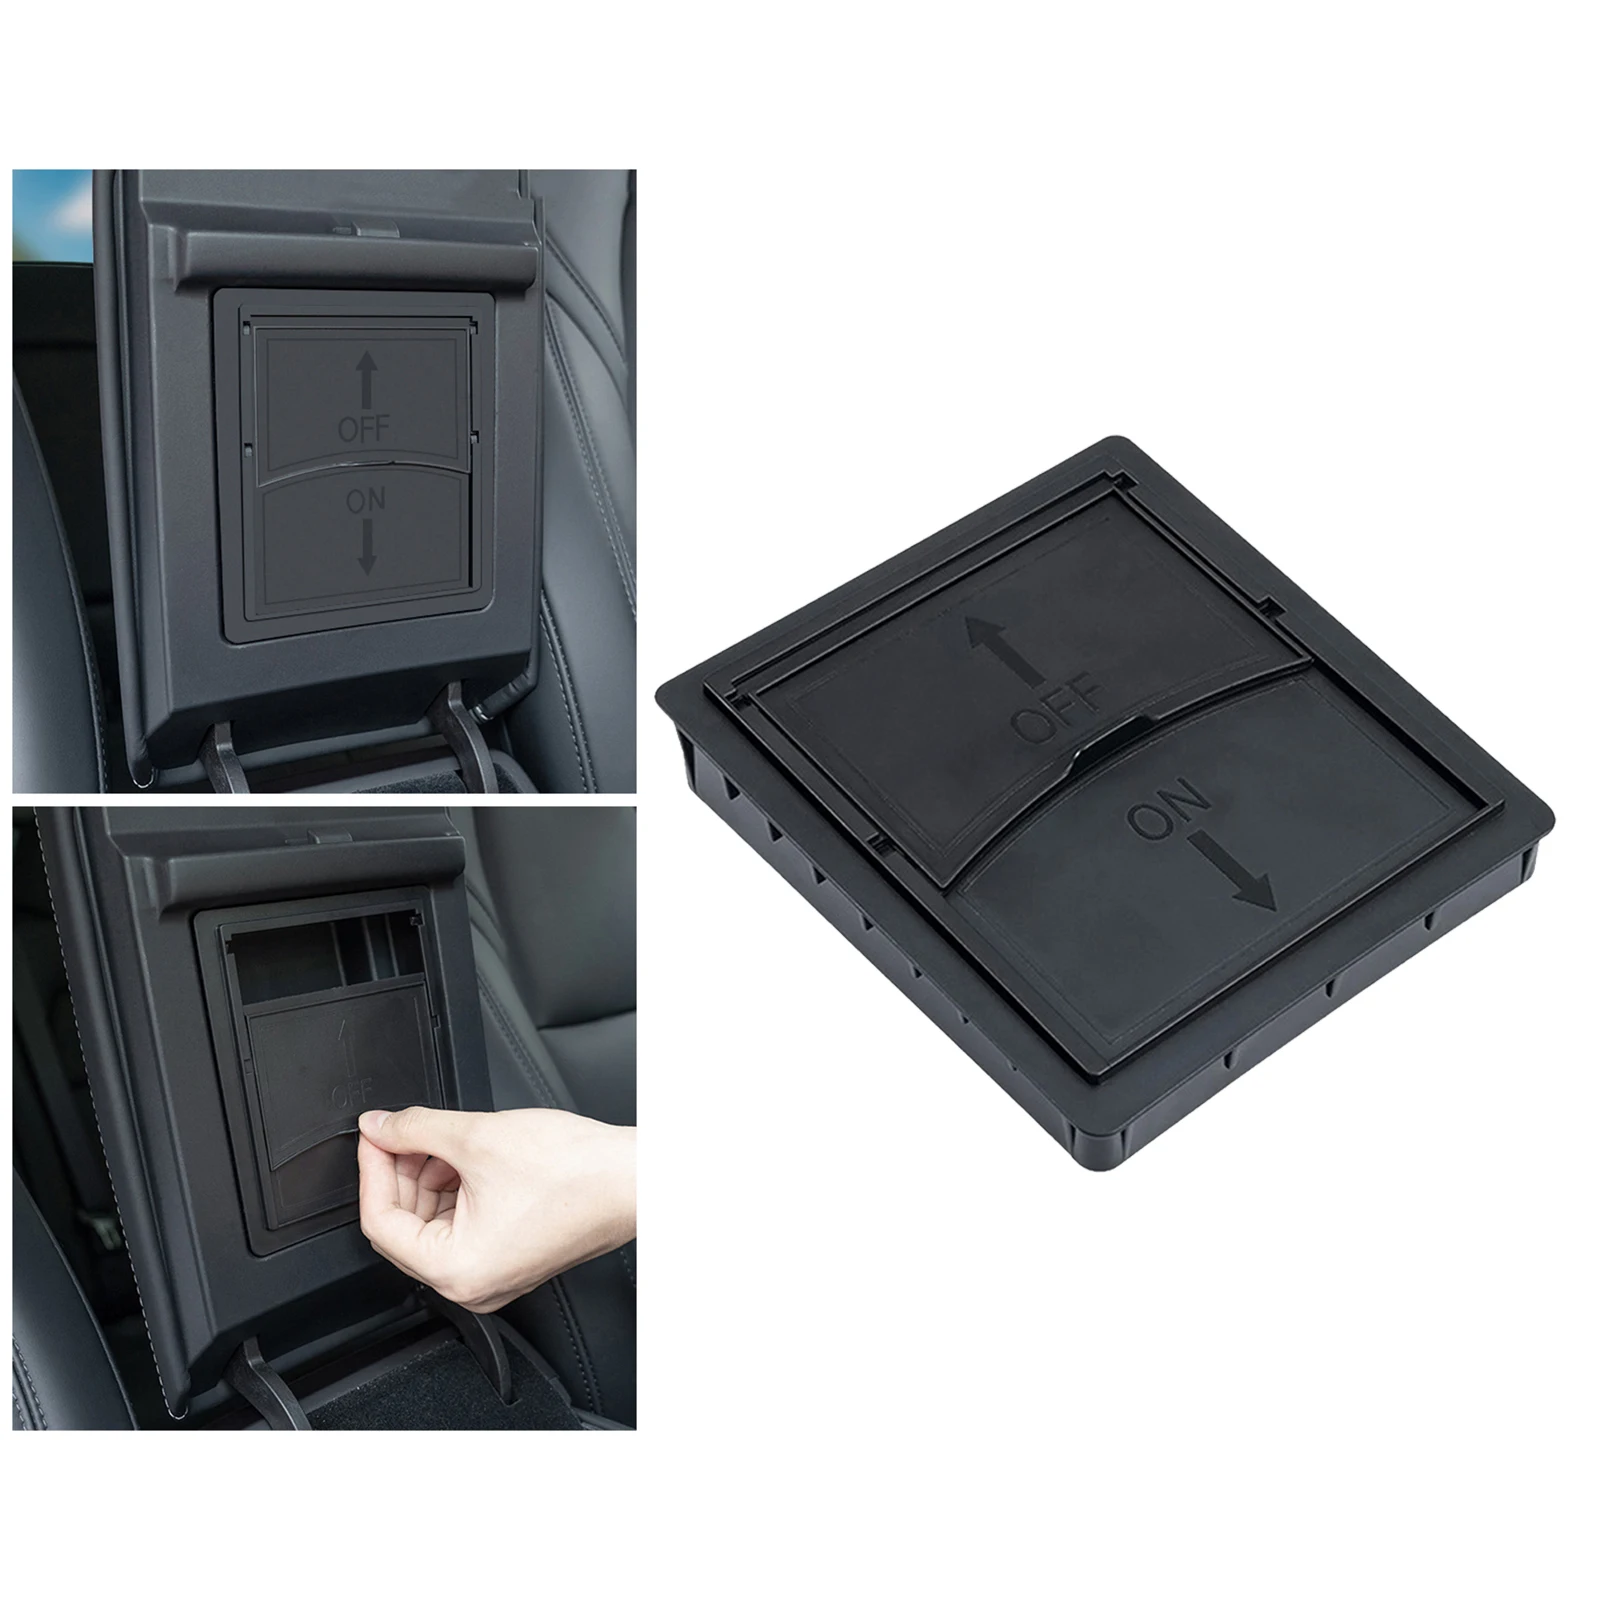 ABS Plastic Interior Center Console Organizer Armrest Easy to Install Car Products Decoration for Tesla Model 3 Y 2017-2021